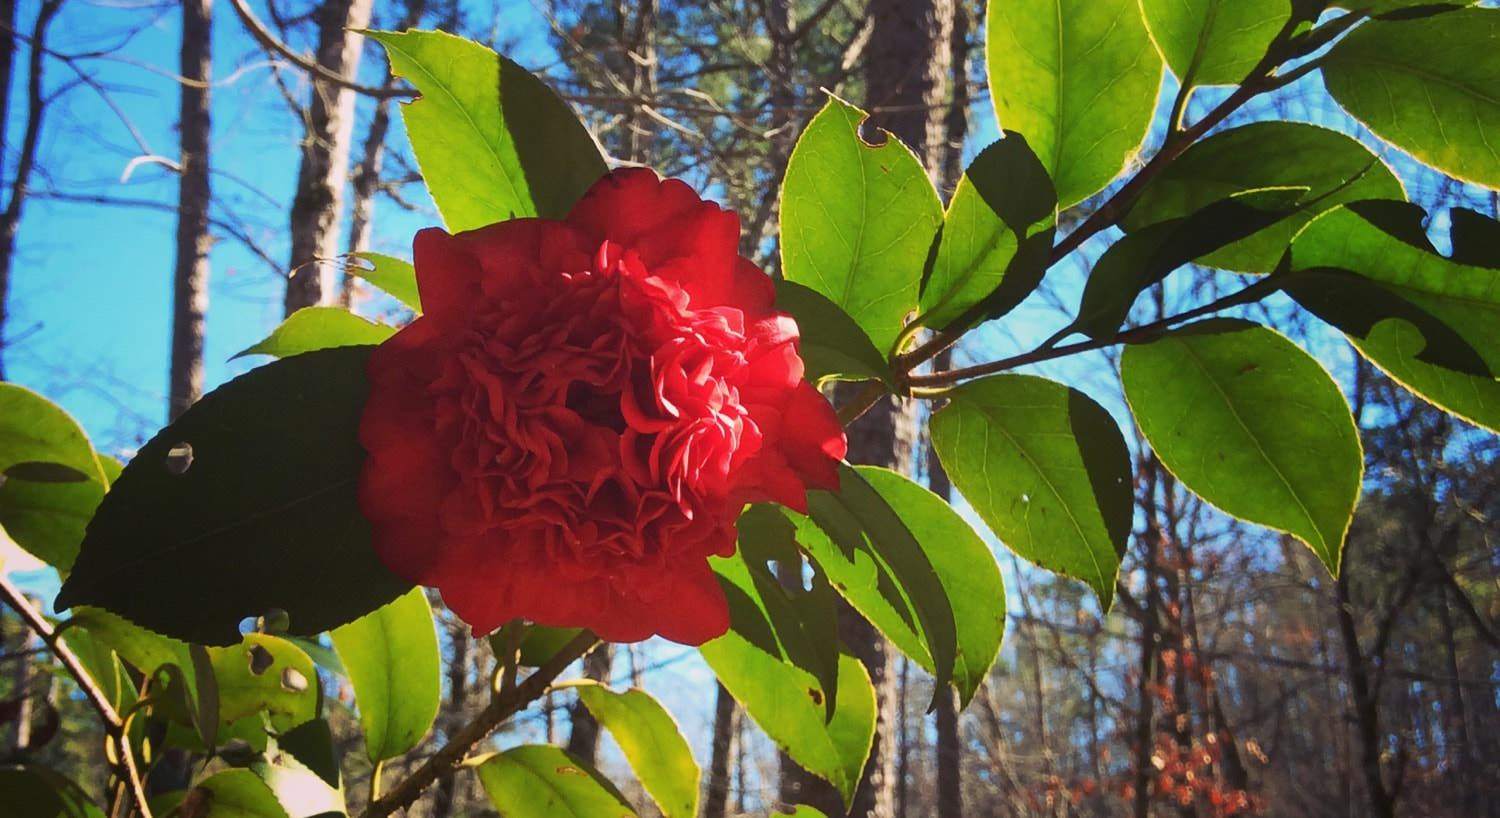 Bright red flower growing on branch with green leaves, blue skies in the background